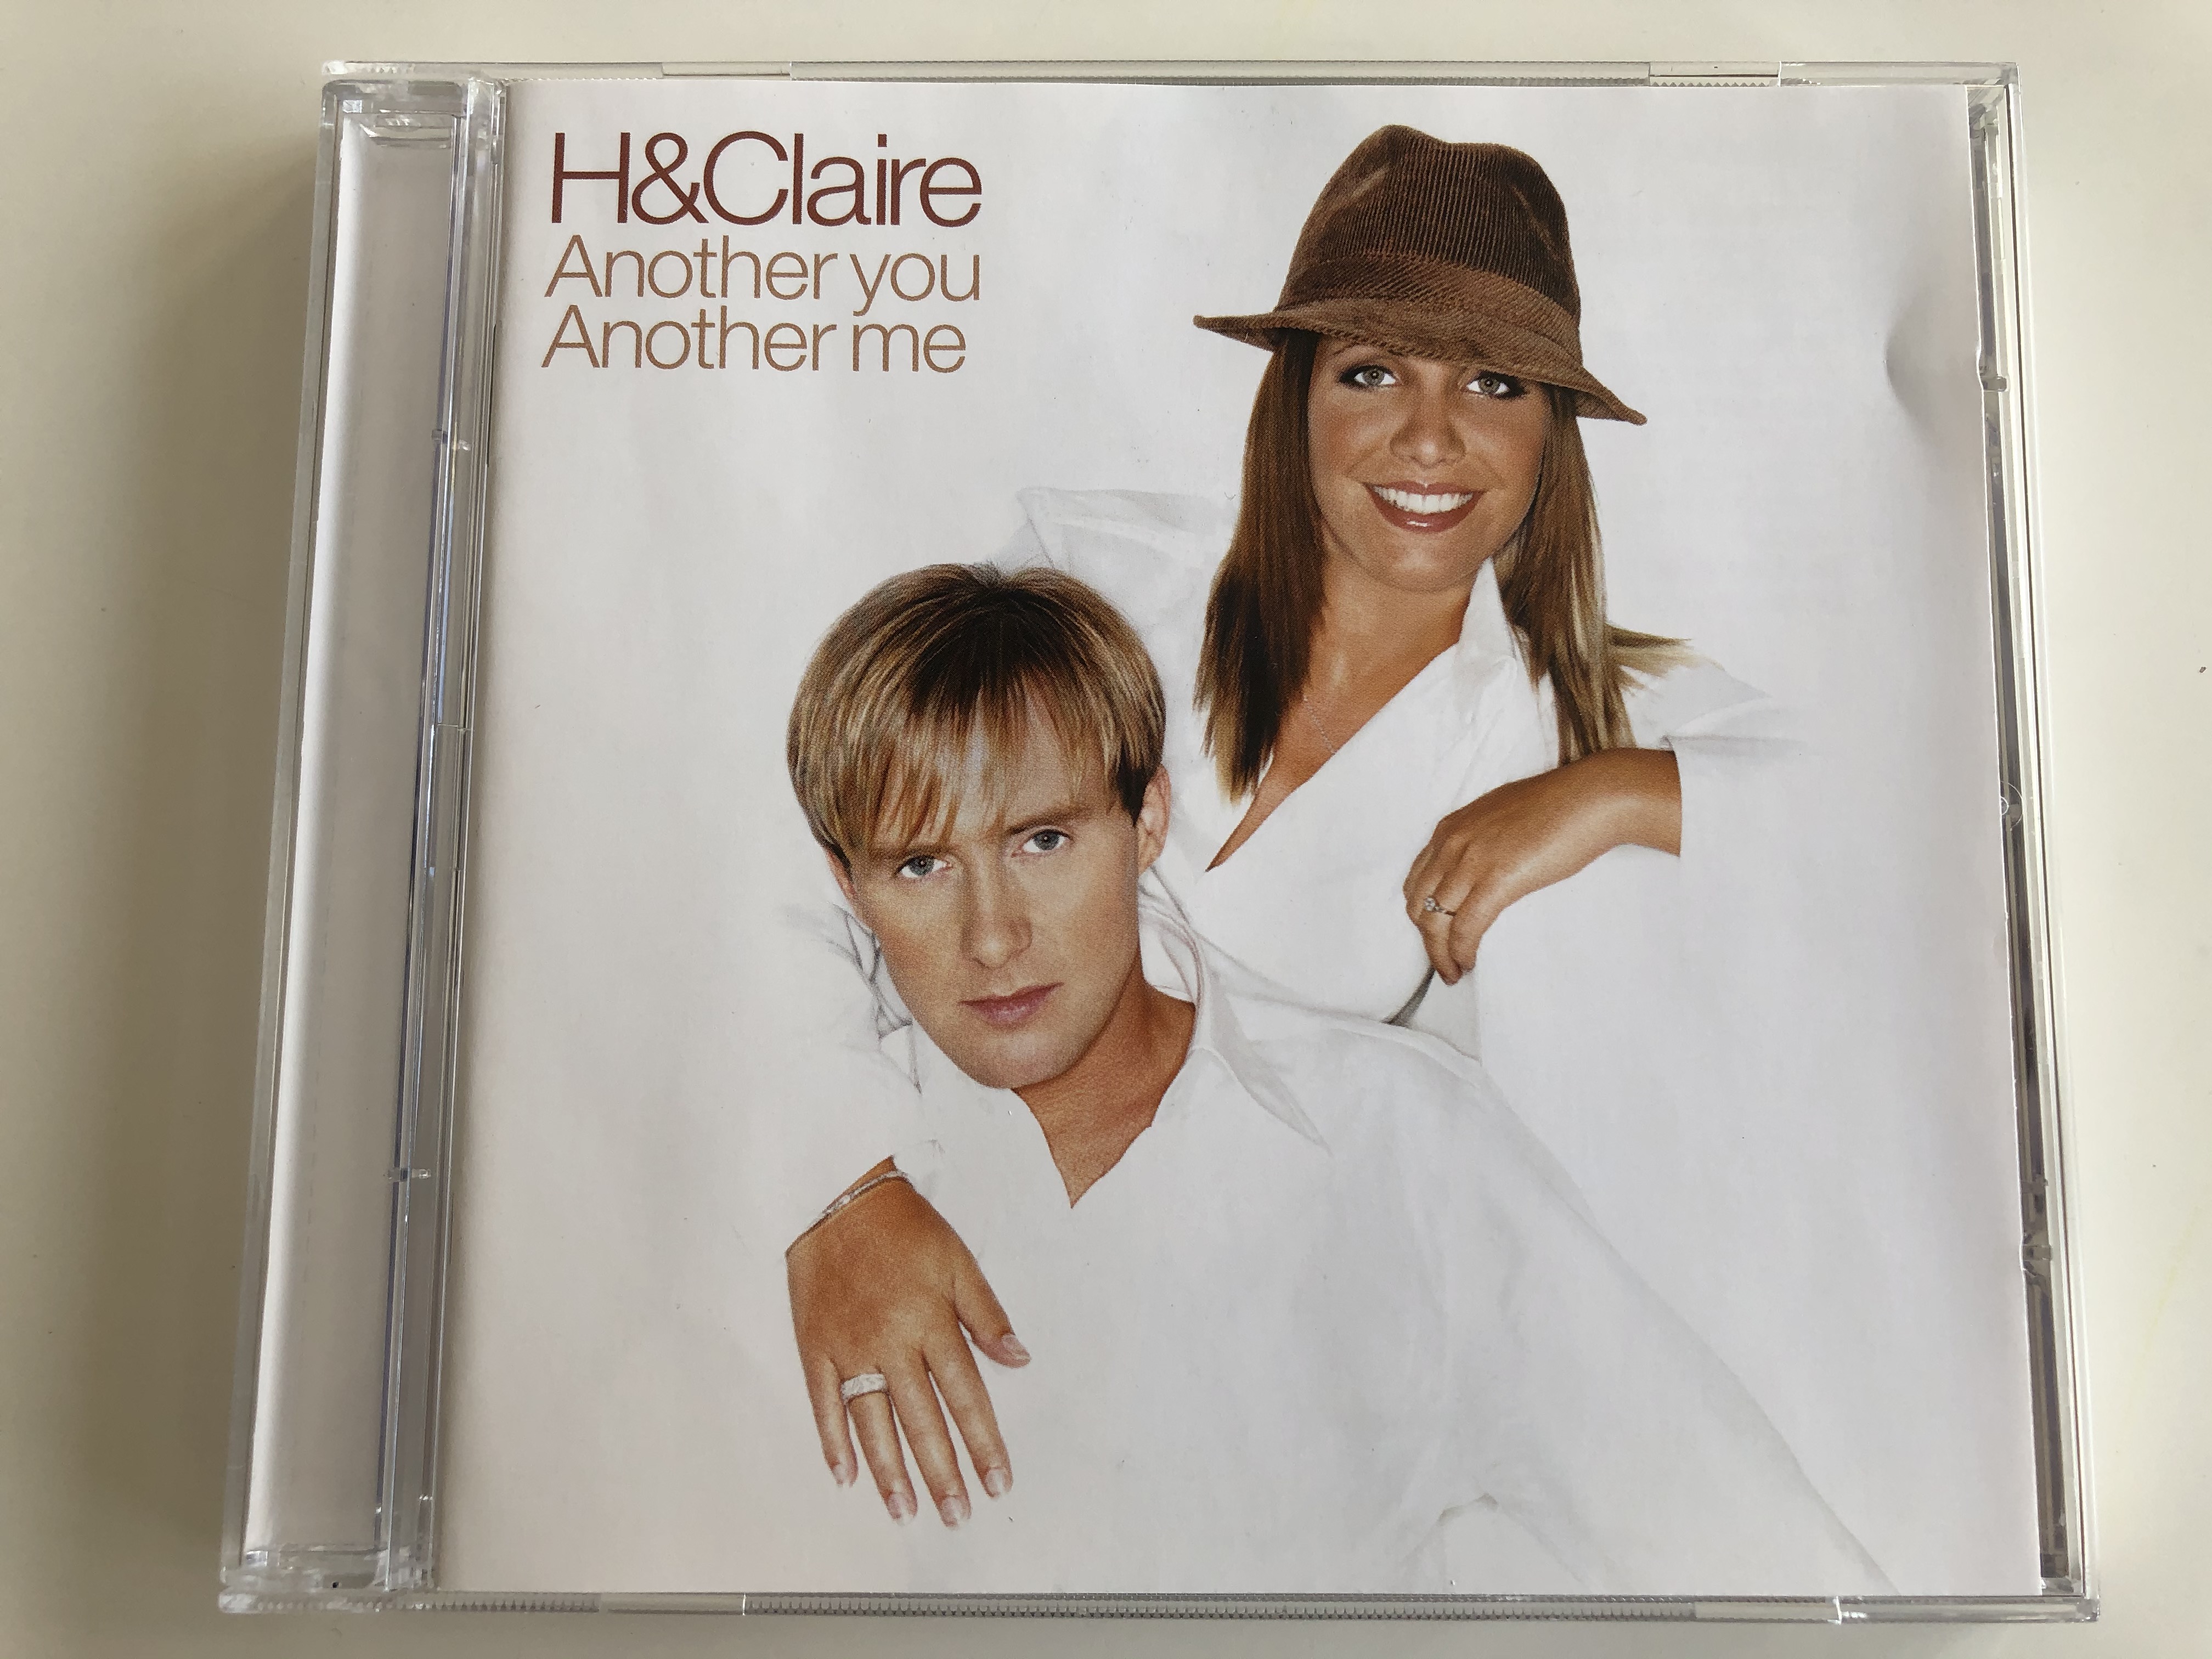 h-claire-another-you-another-me-wea-audio-cd-0927-49462-2-1-.jpg